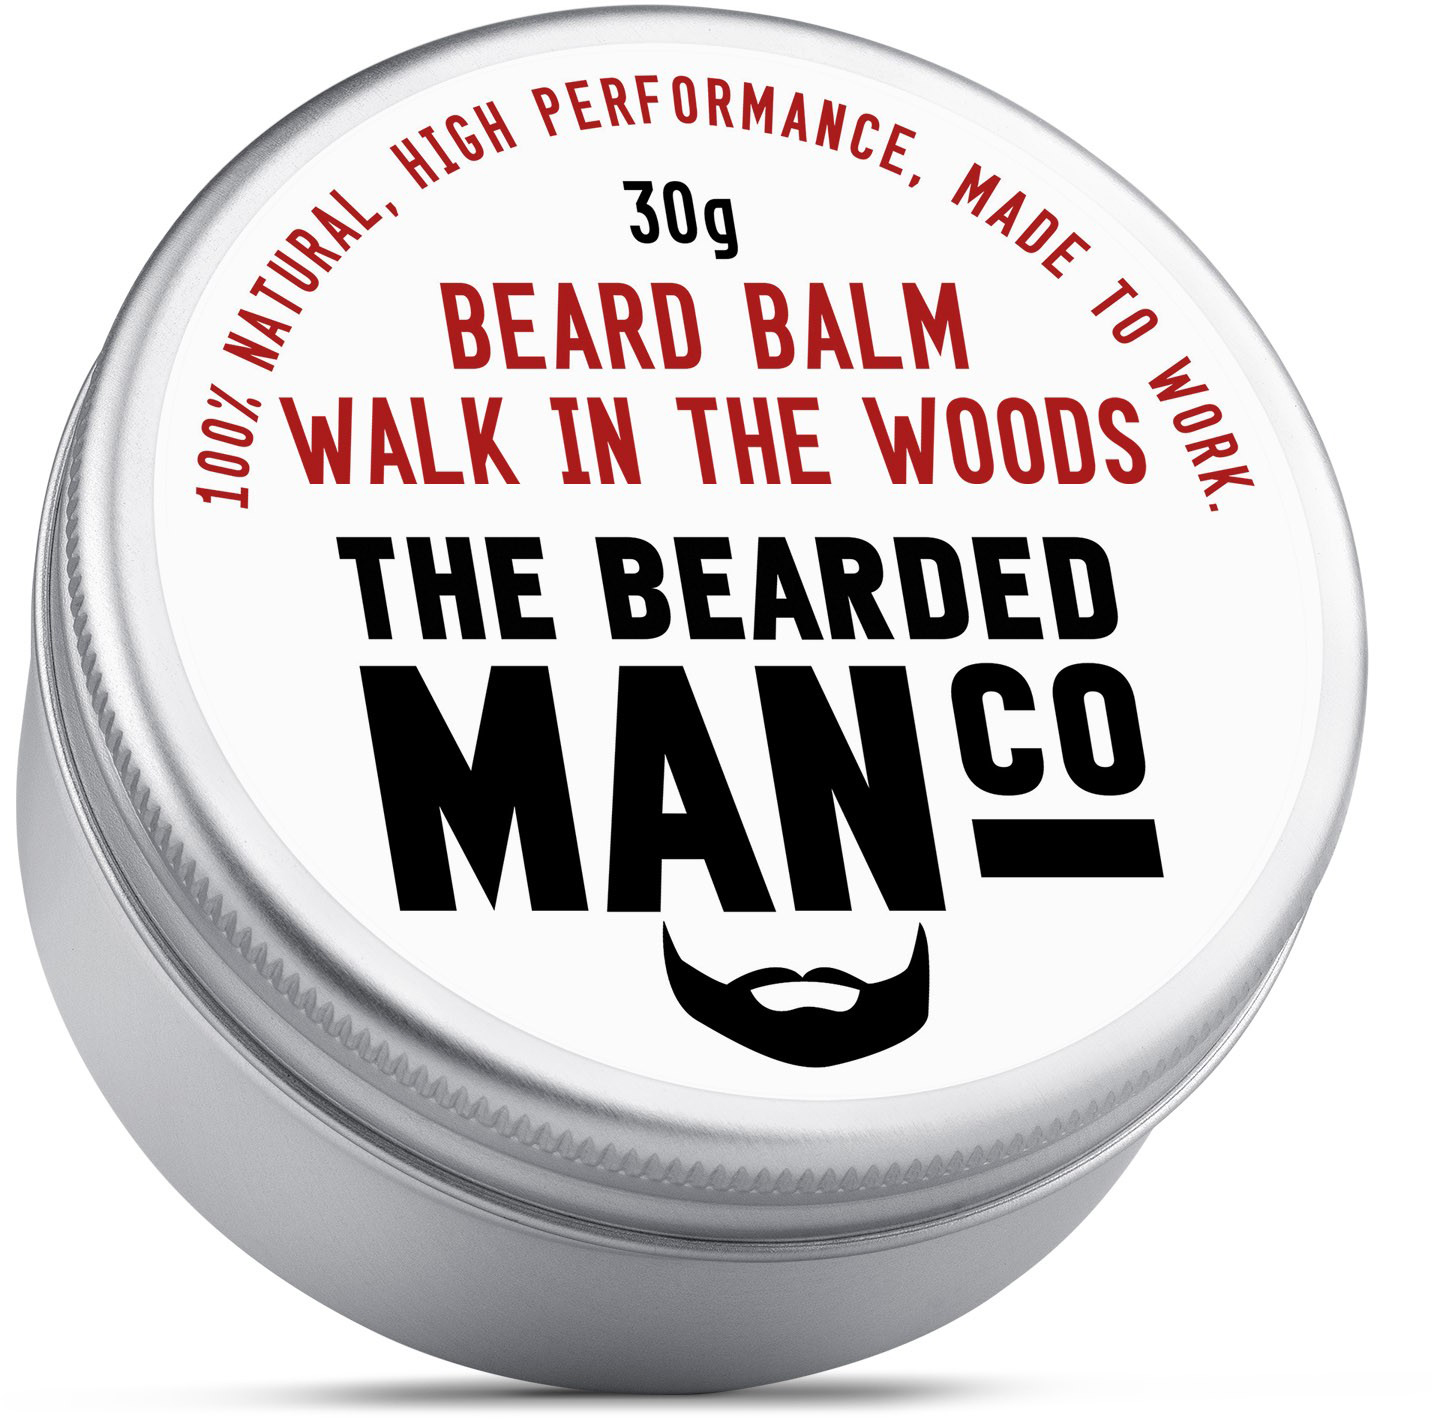 The Bearded Man Balm Walk In The Woods